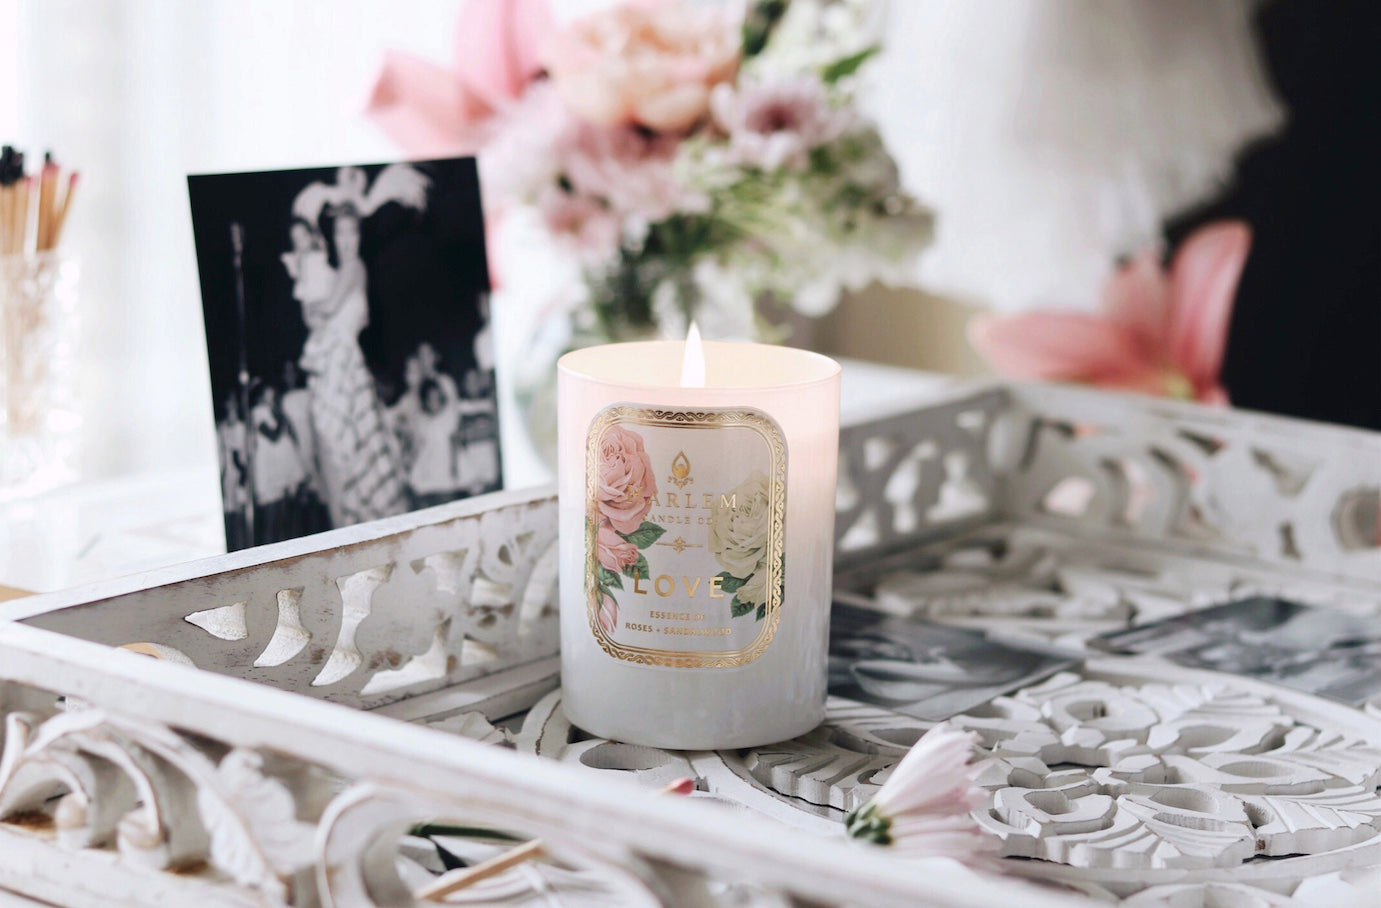 Lifestyle image of our Love candle with flowers and a black and white photo in the background